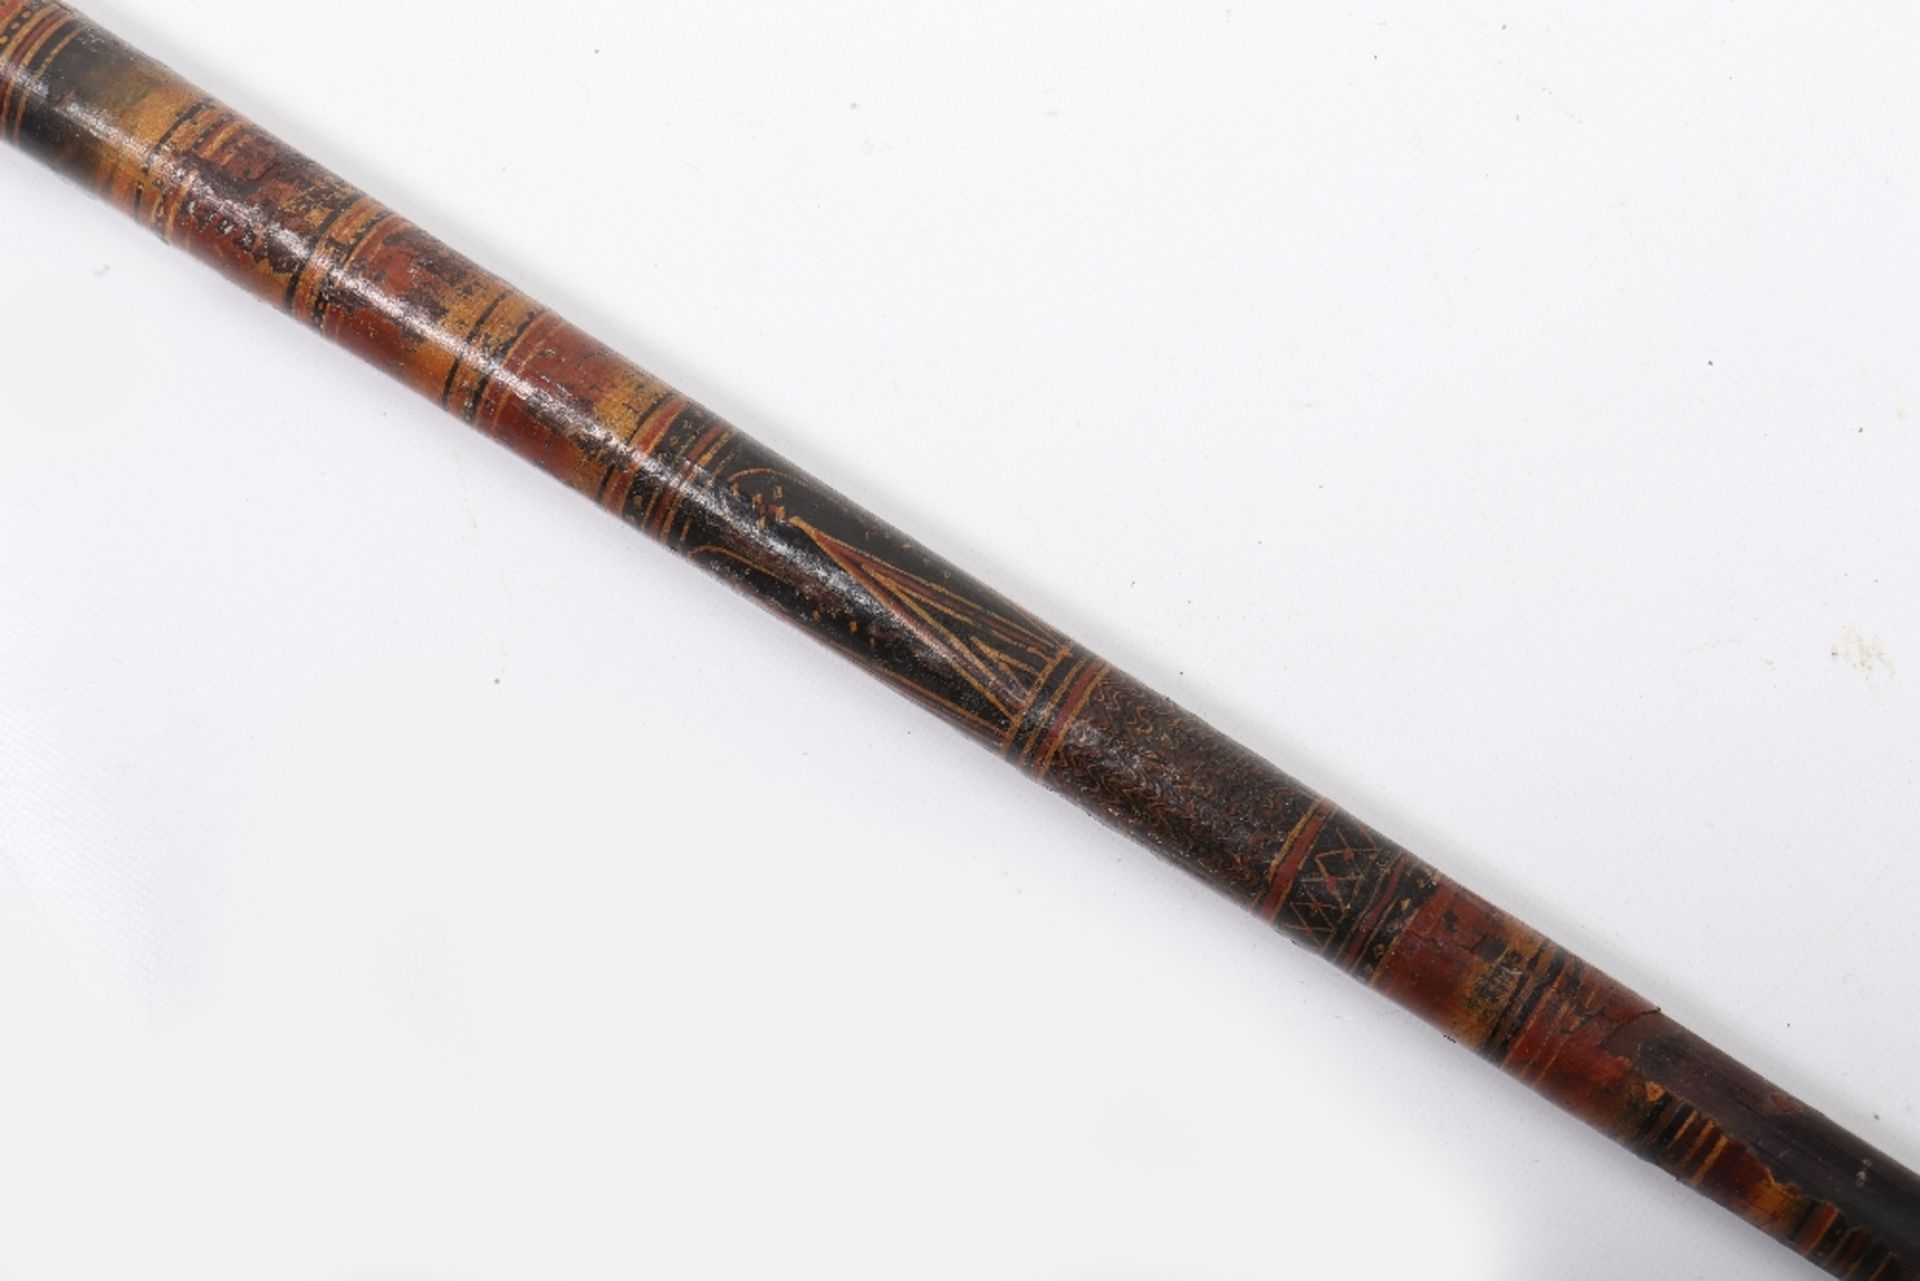 Ceylonese Spear Patisthanaya, Probably 18th or 19th Century - Image 4 of 9